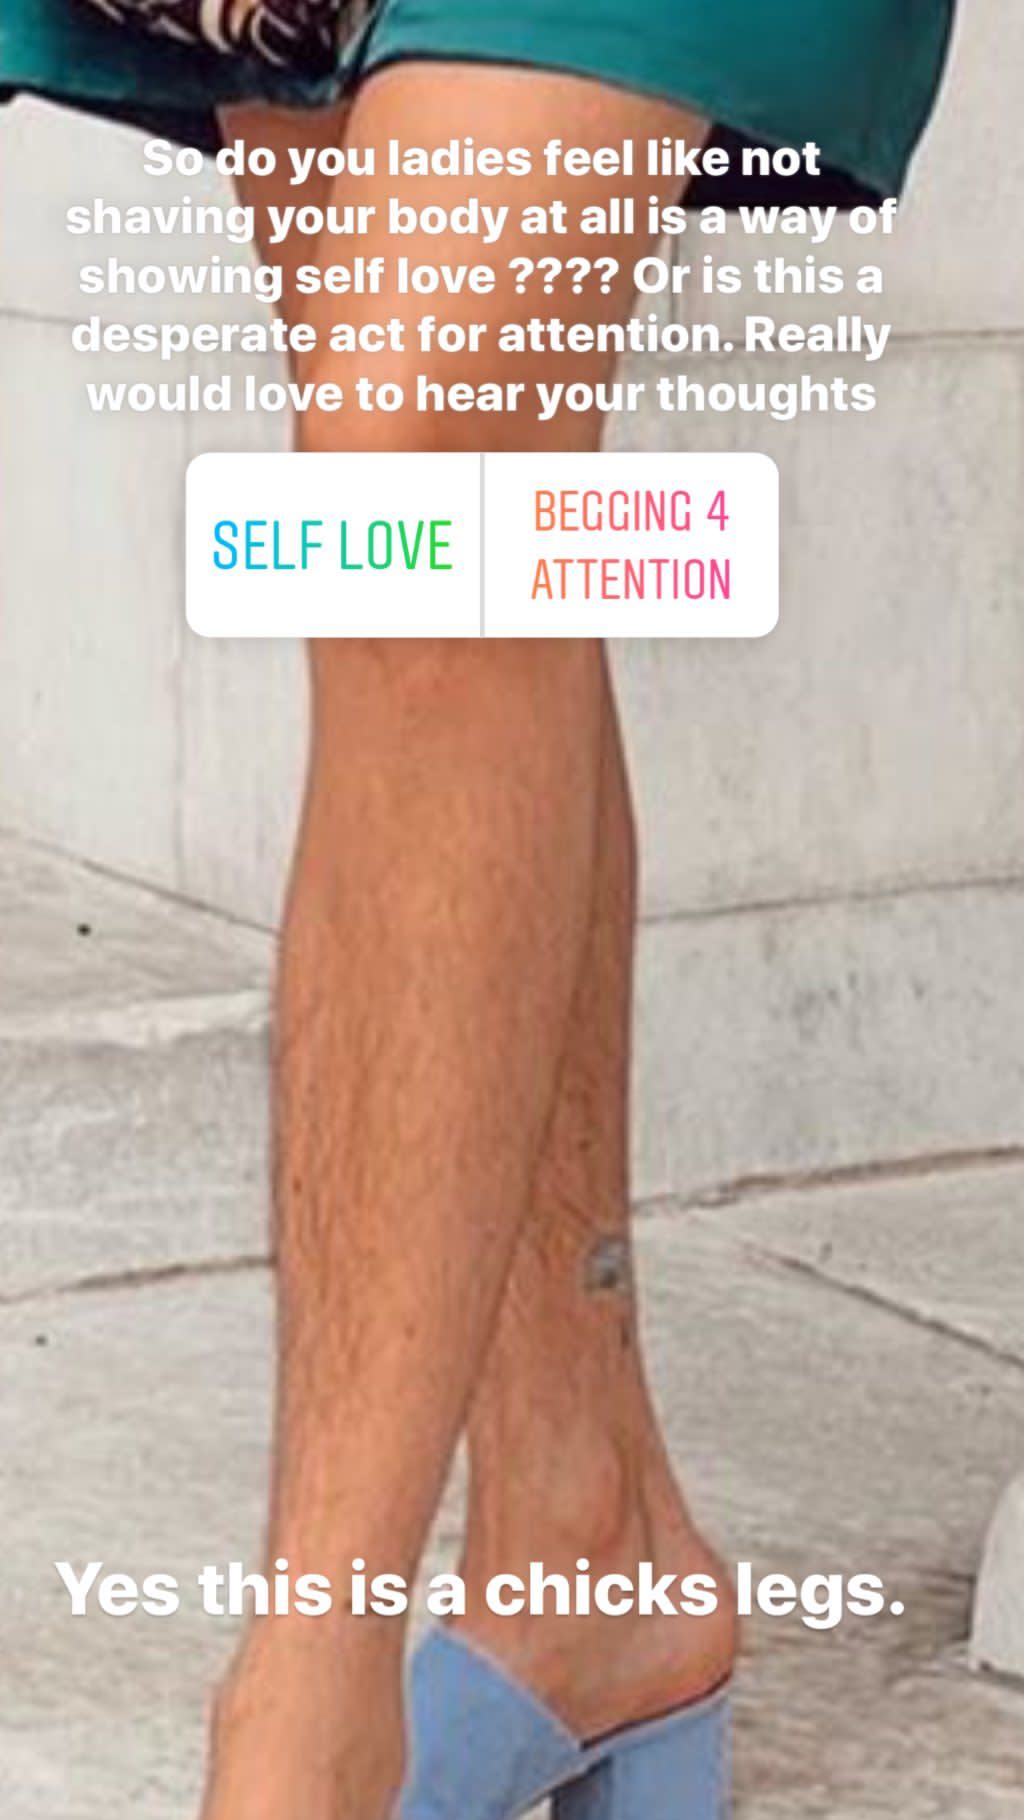 An Instagram user named John James posted to his story to ask followers if Martinez's leg hair was an act of self-love or a way to get attention. (Photo: Instagram)